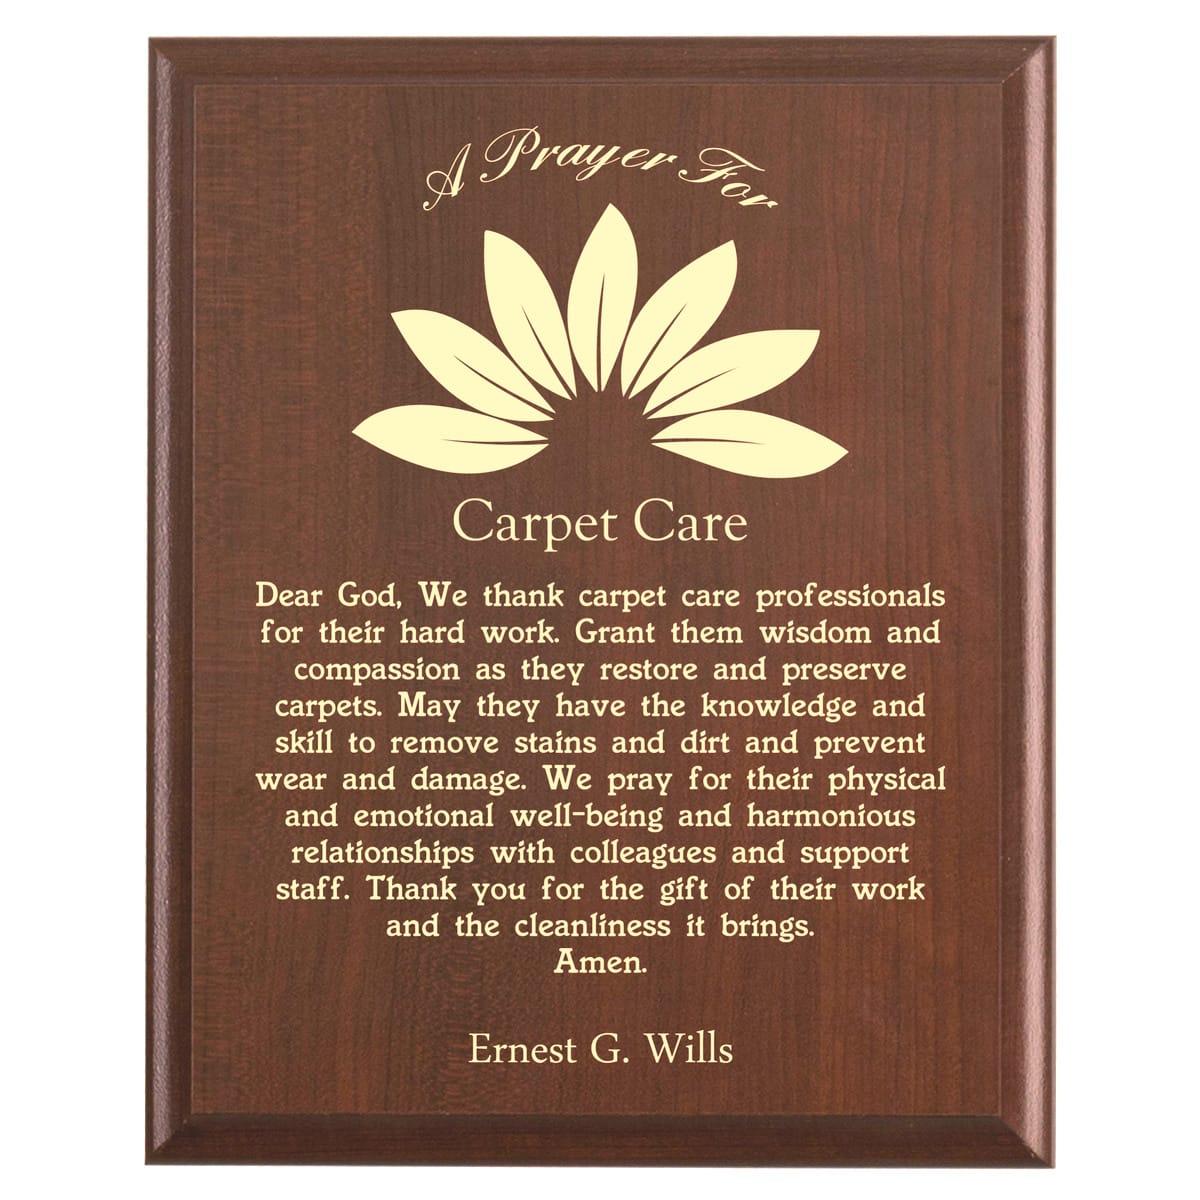 Plaque photo: Carpet Care Prayer Plaque design with free personalization. Wood style finish with customized text.